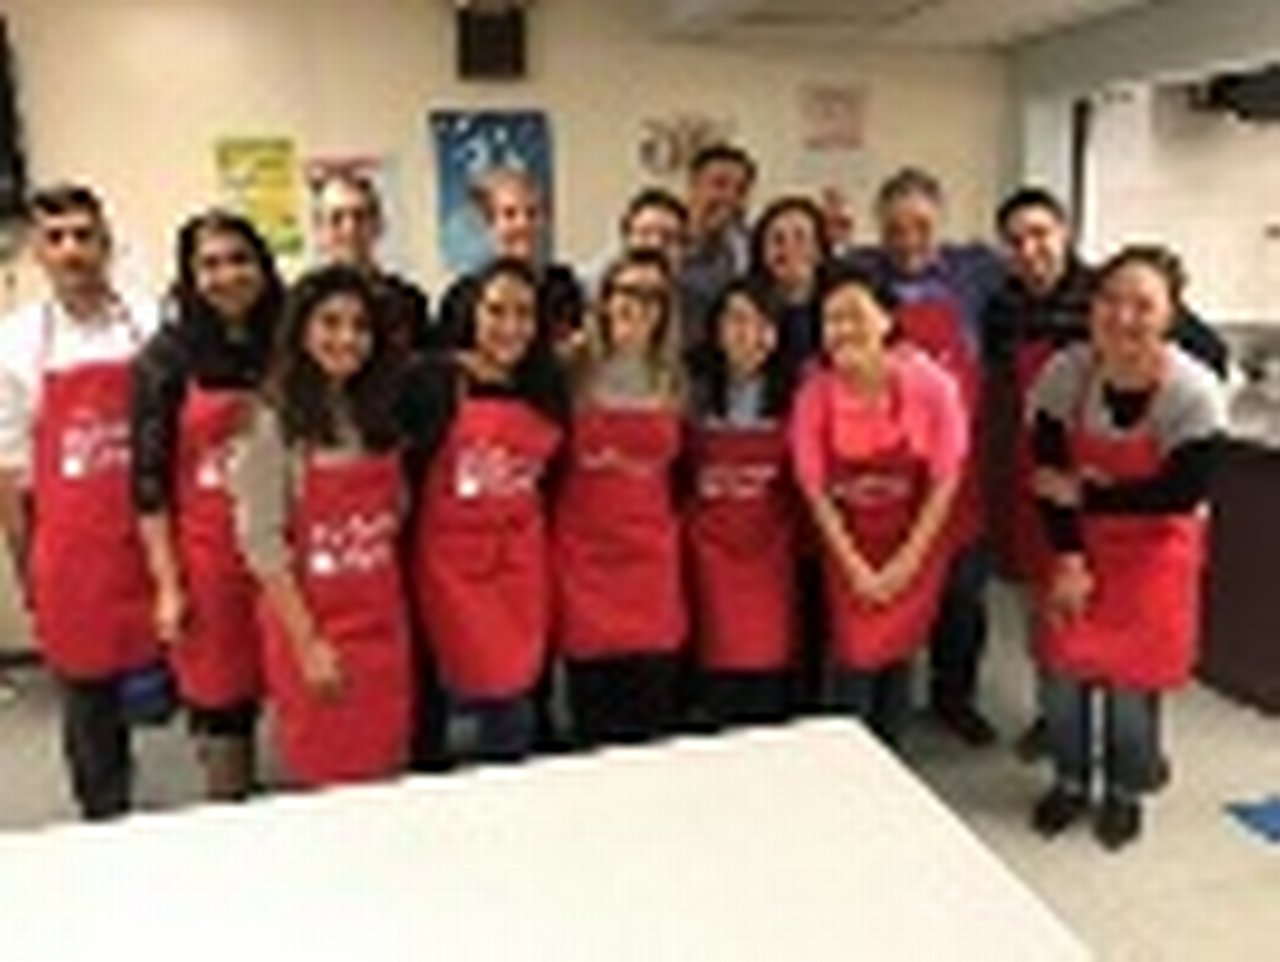 Global Transaction Banking (Trade Finance) spent Thanksgiving Eve preparing for the holiday meal at The Bowery Mission Men’s Transitional Center.